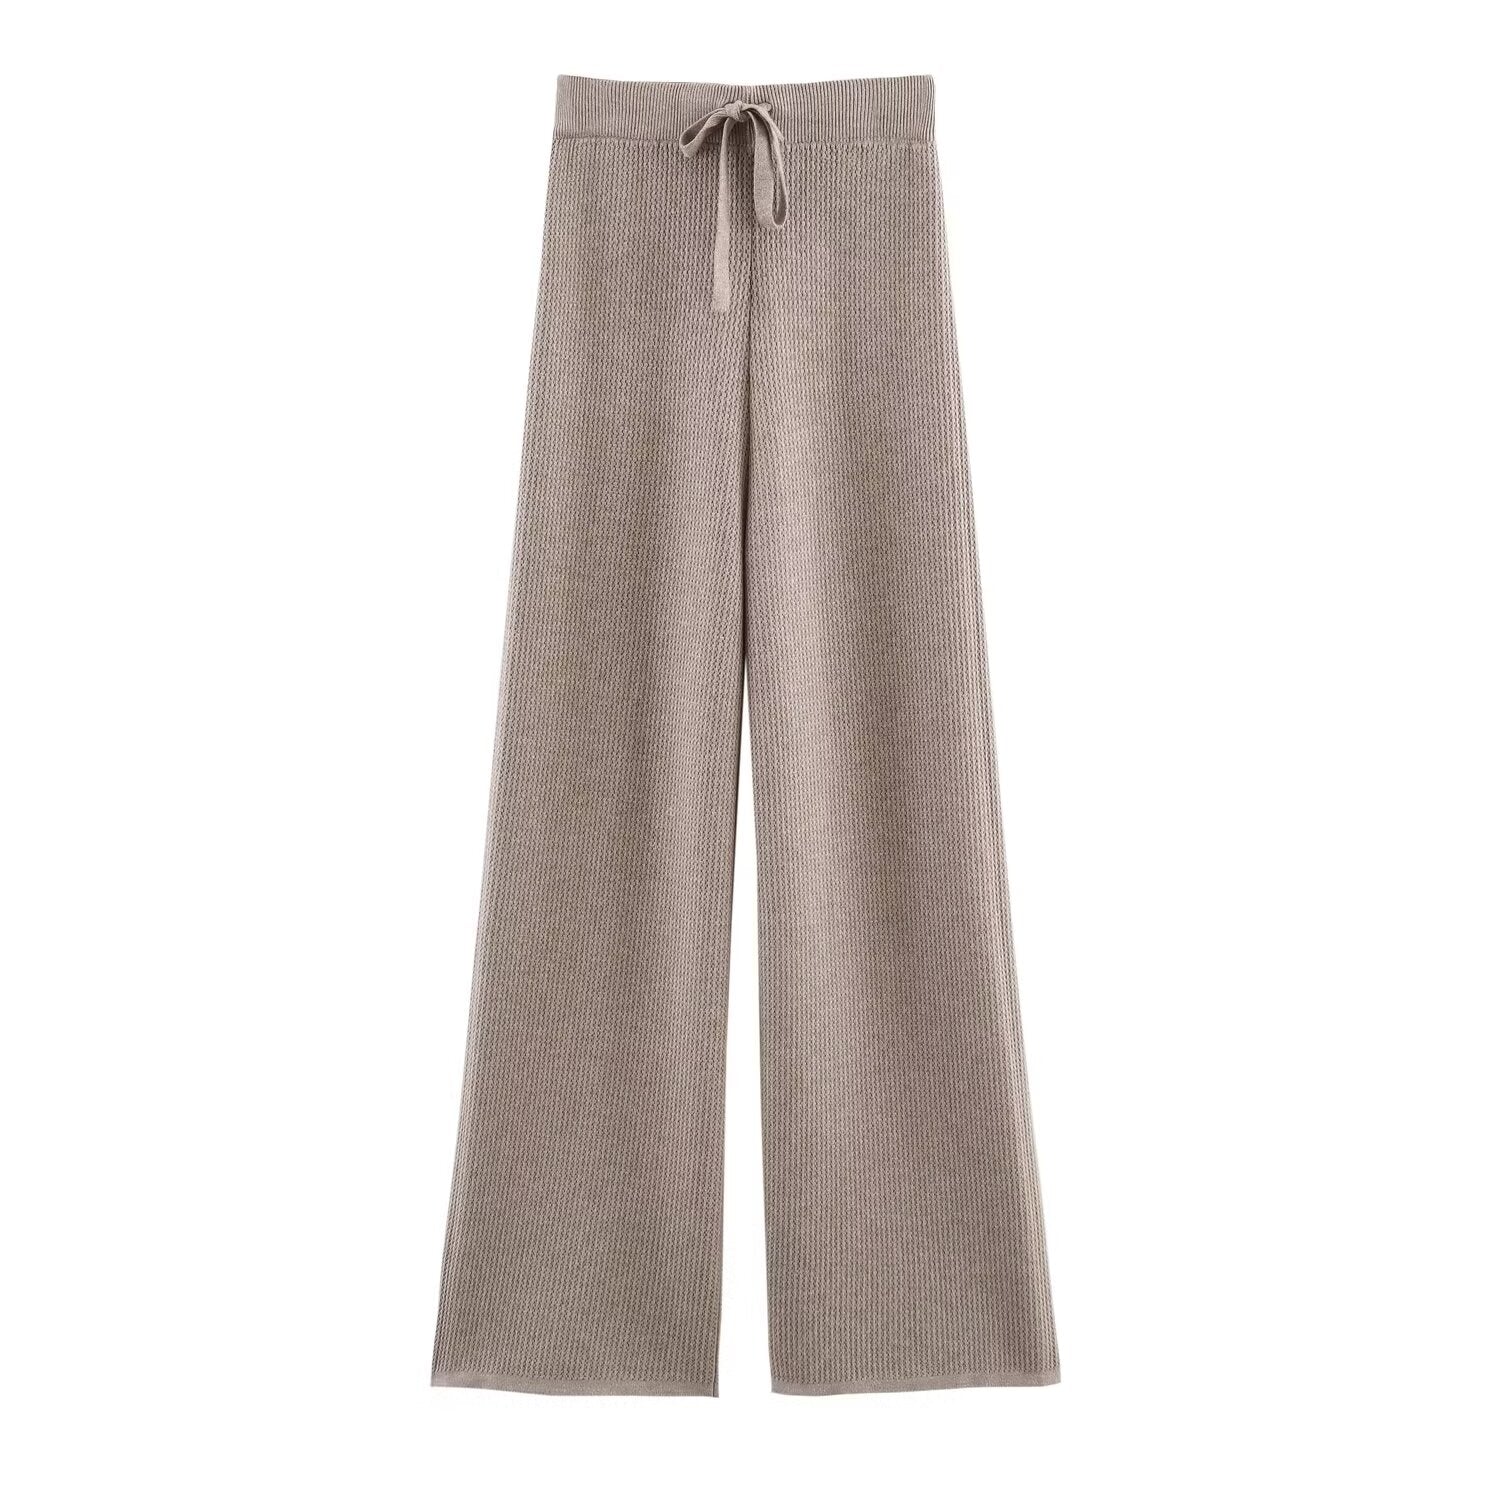 Winter Women Clothing Glutinous Rice Pants Knitted Elastic Trousers